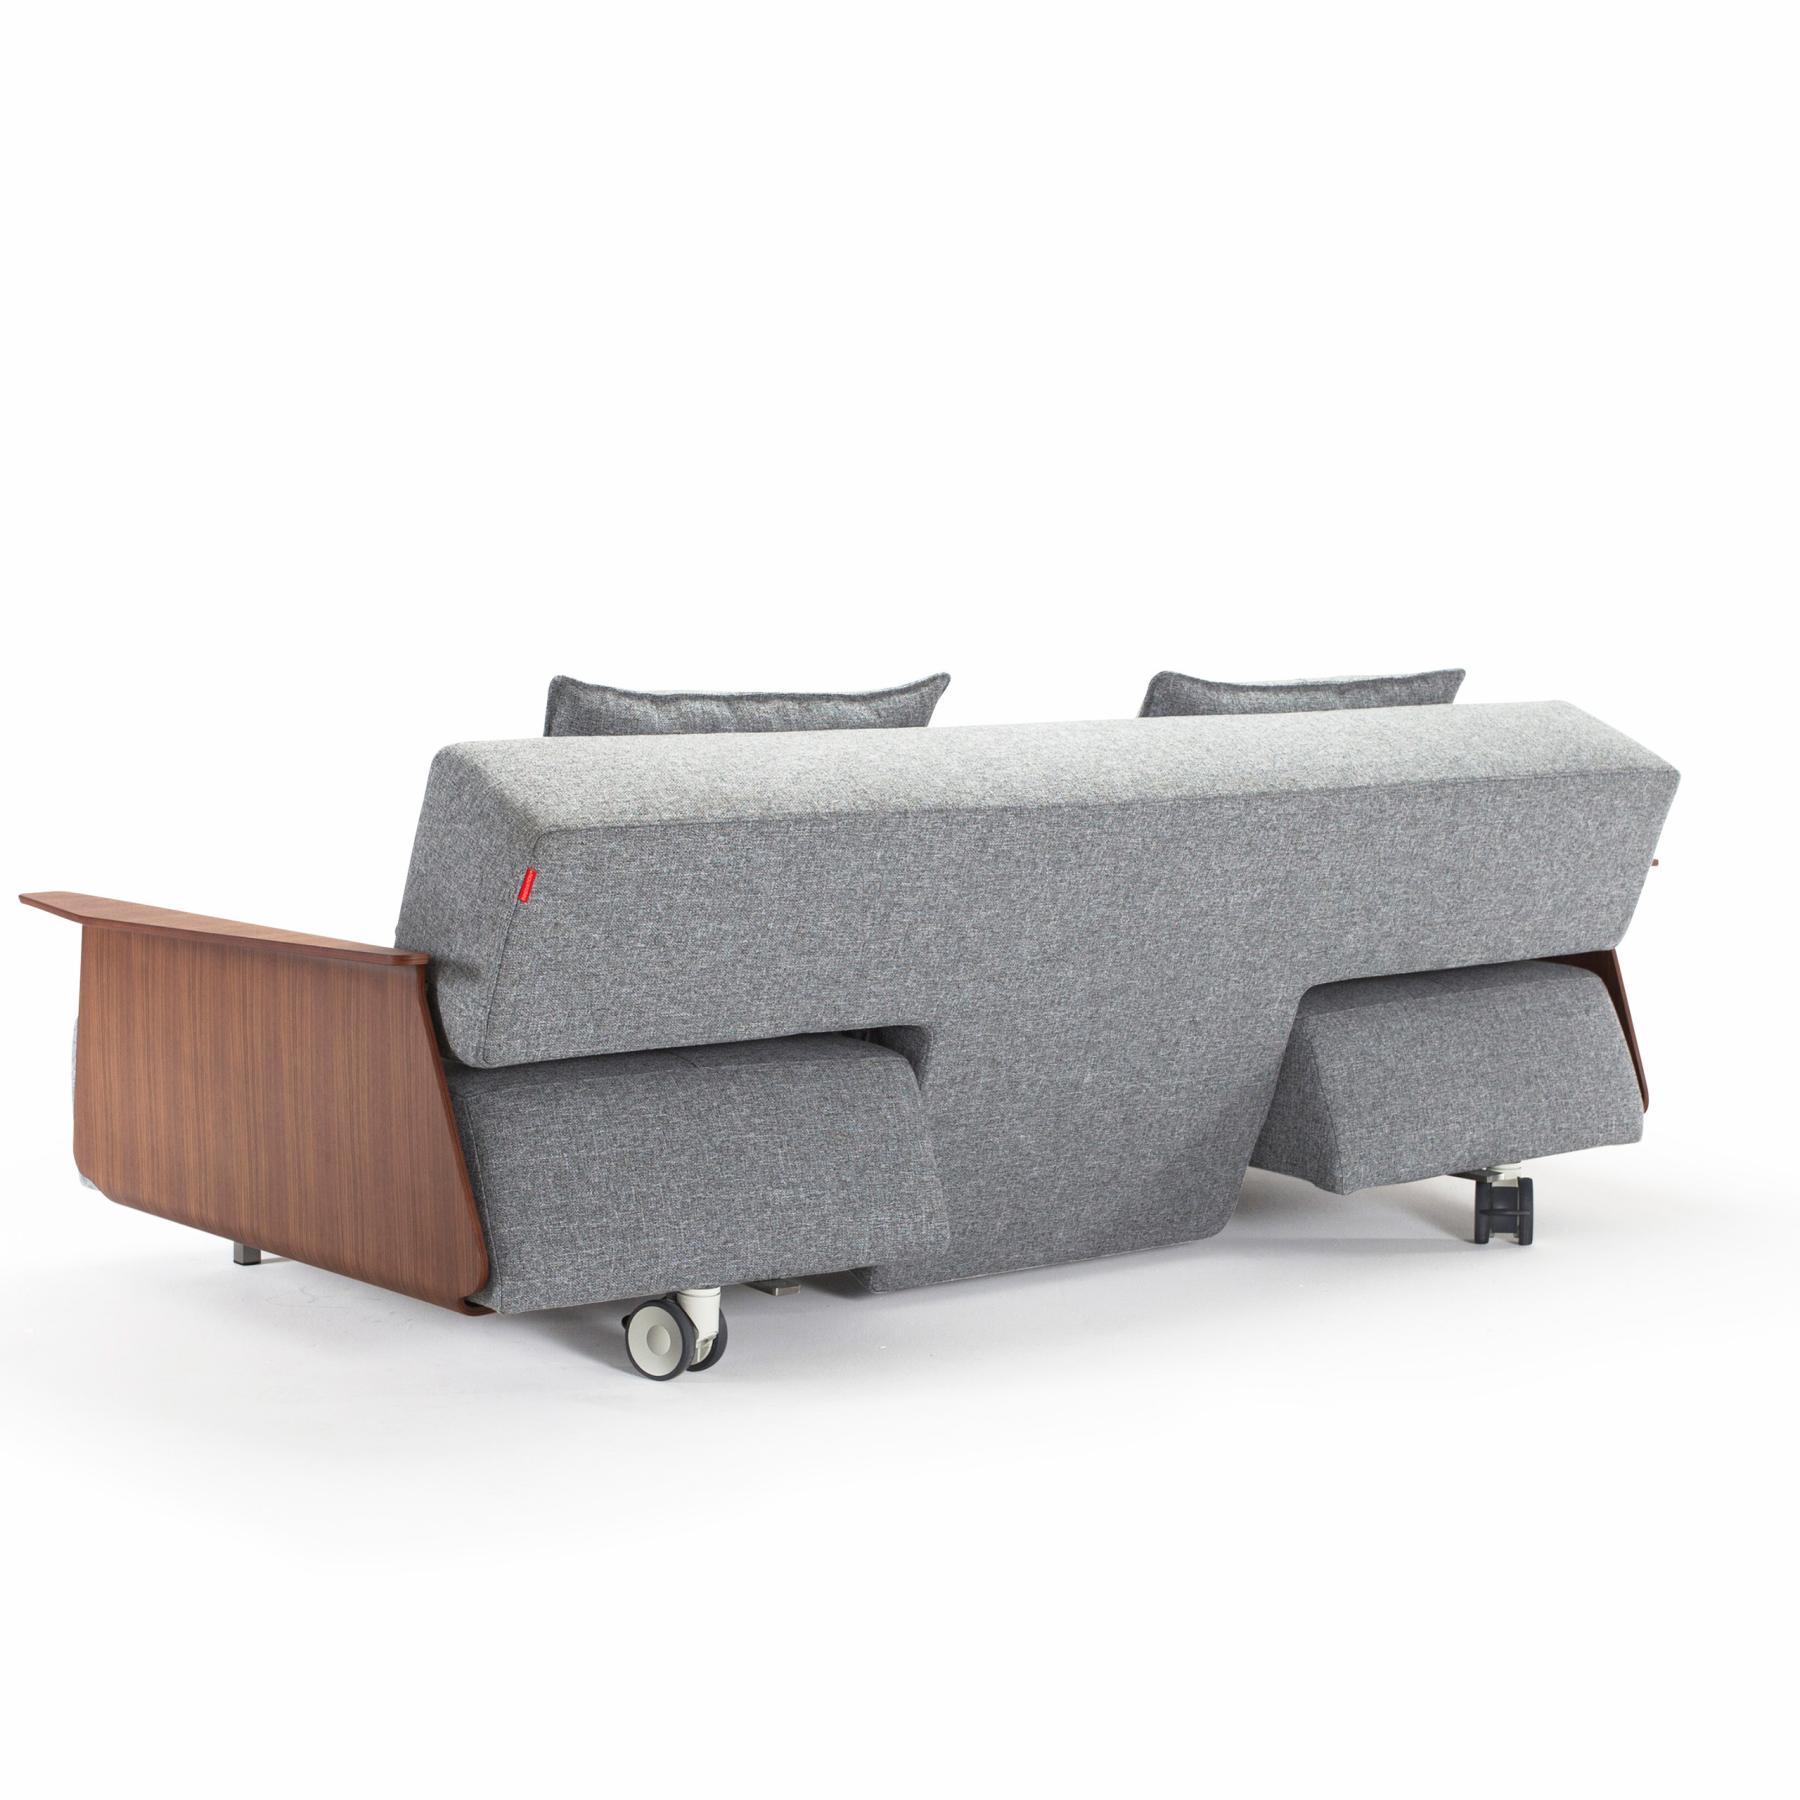 long-horn-sofa-with-arms-565-p3